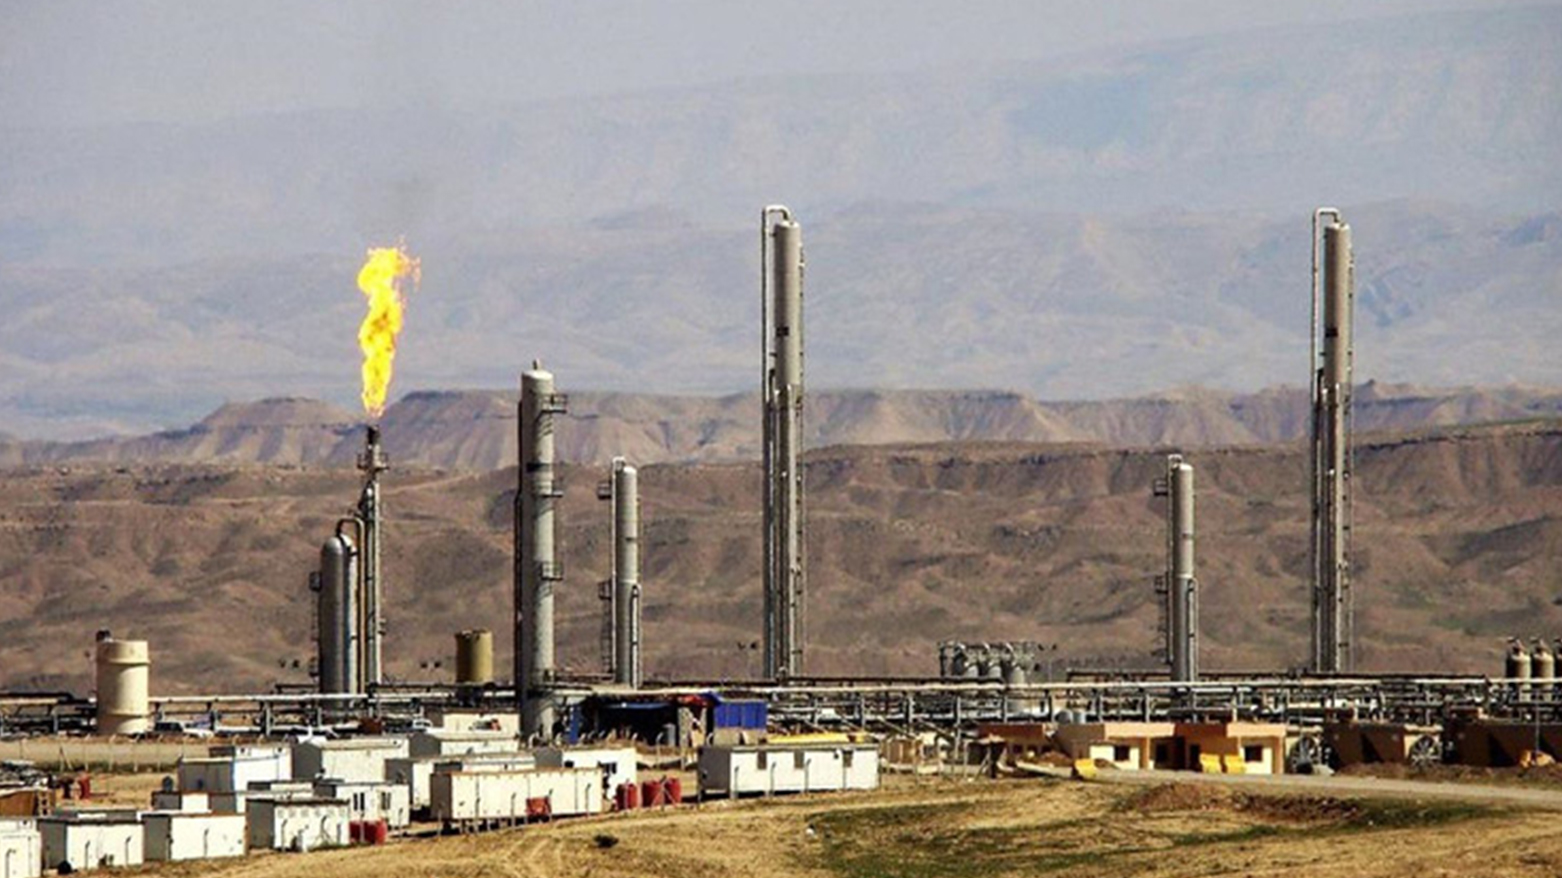 Khor Mor gas field in the Chamchamal district of Sulaimani province. (Photo: Handout/Dana Gas)